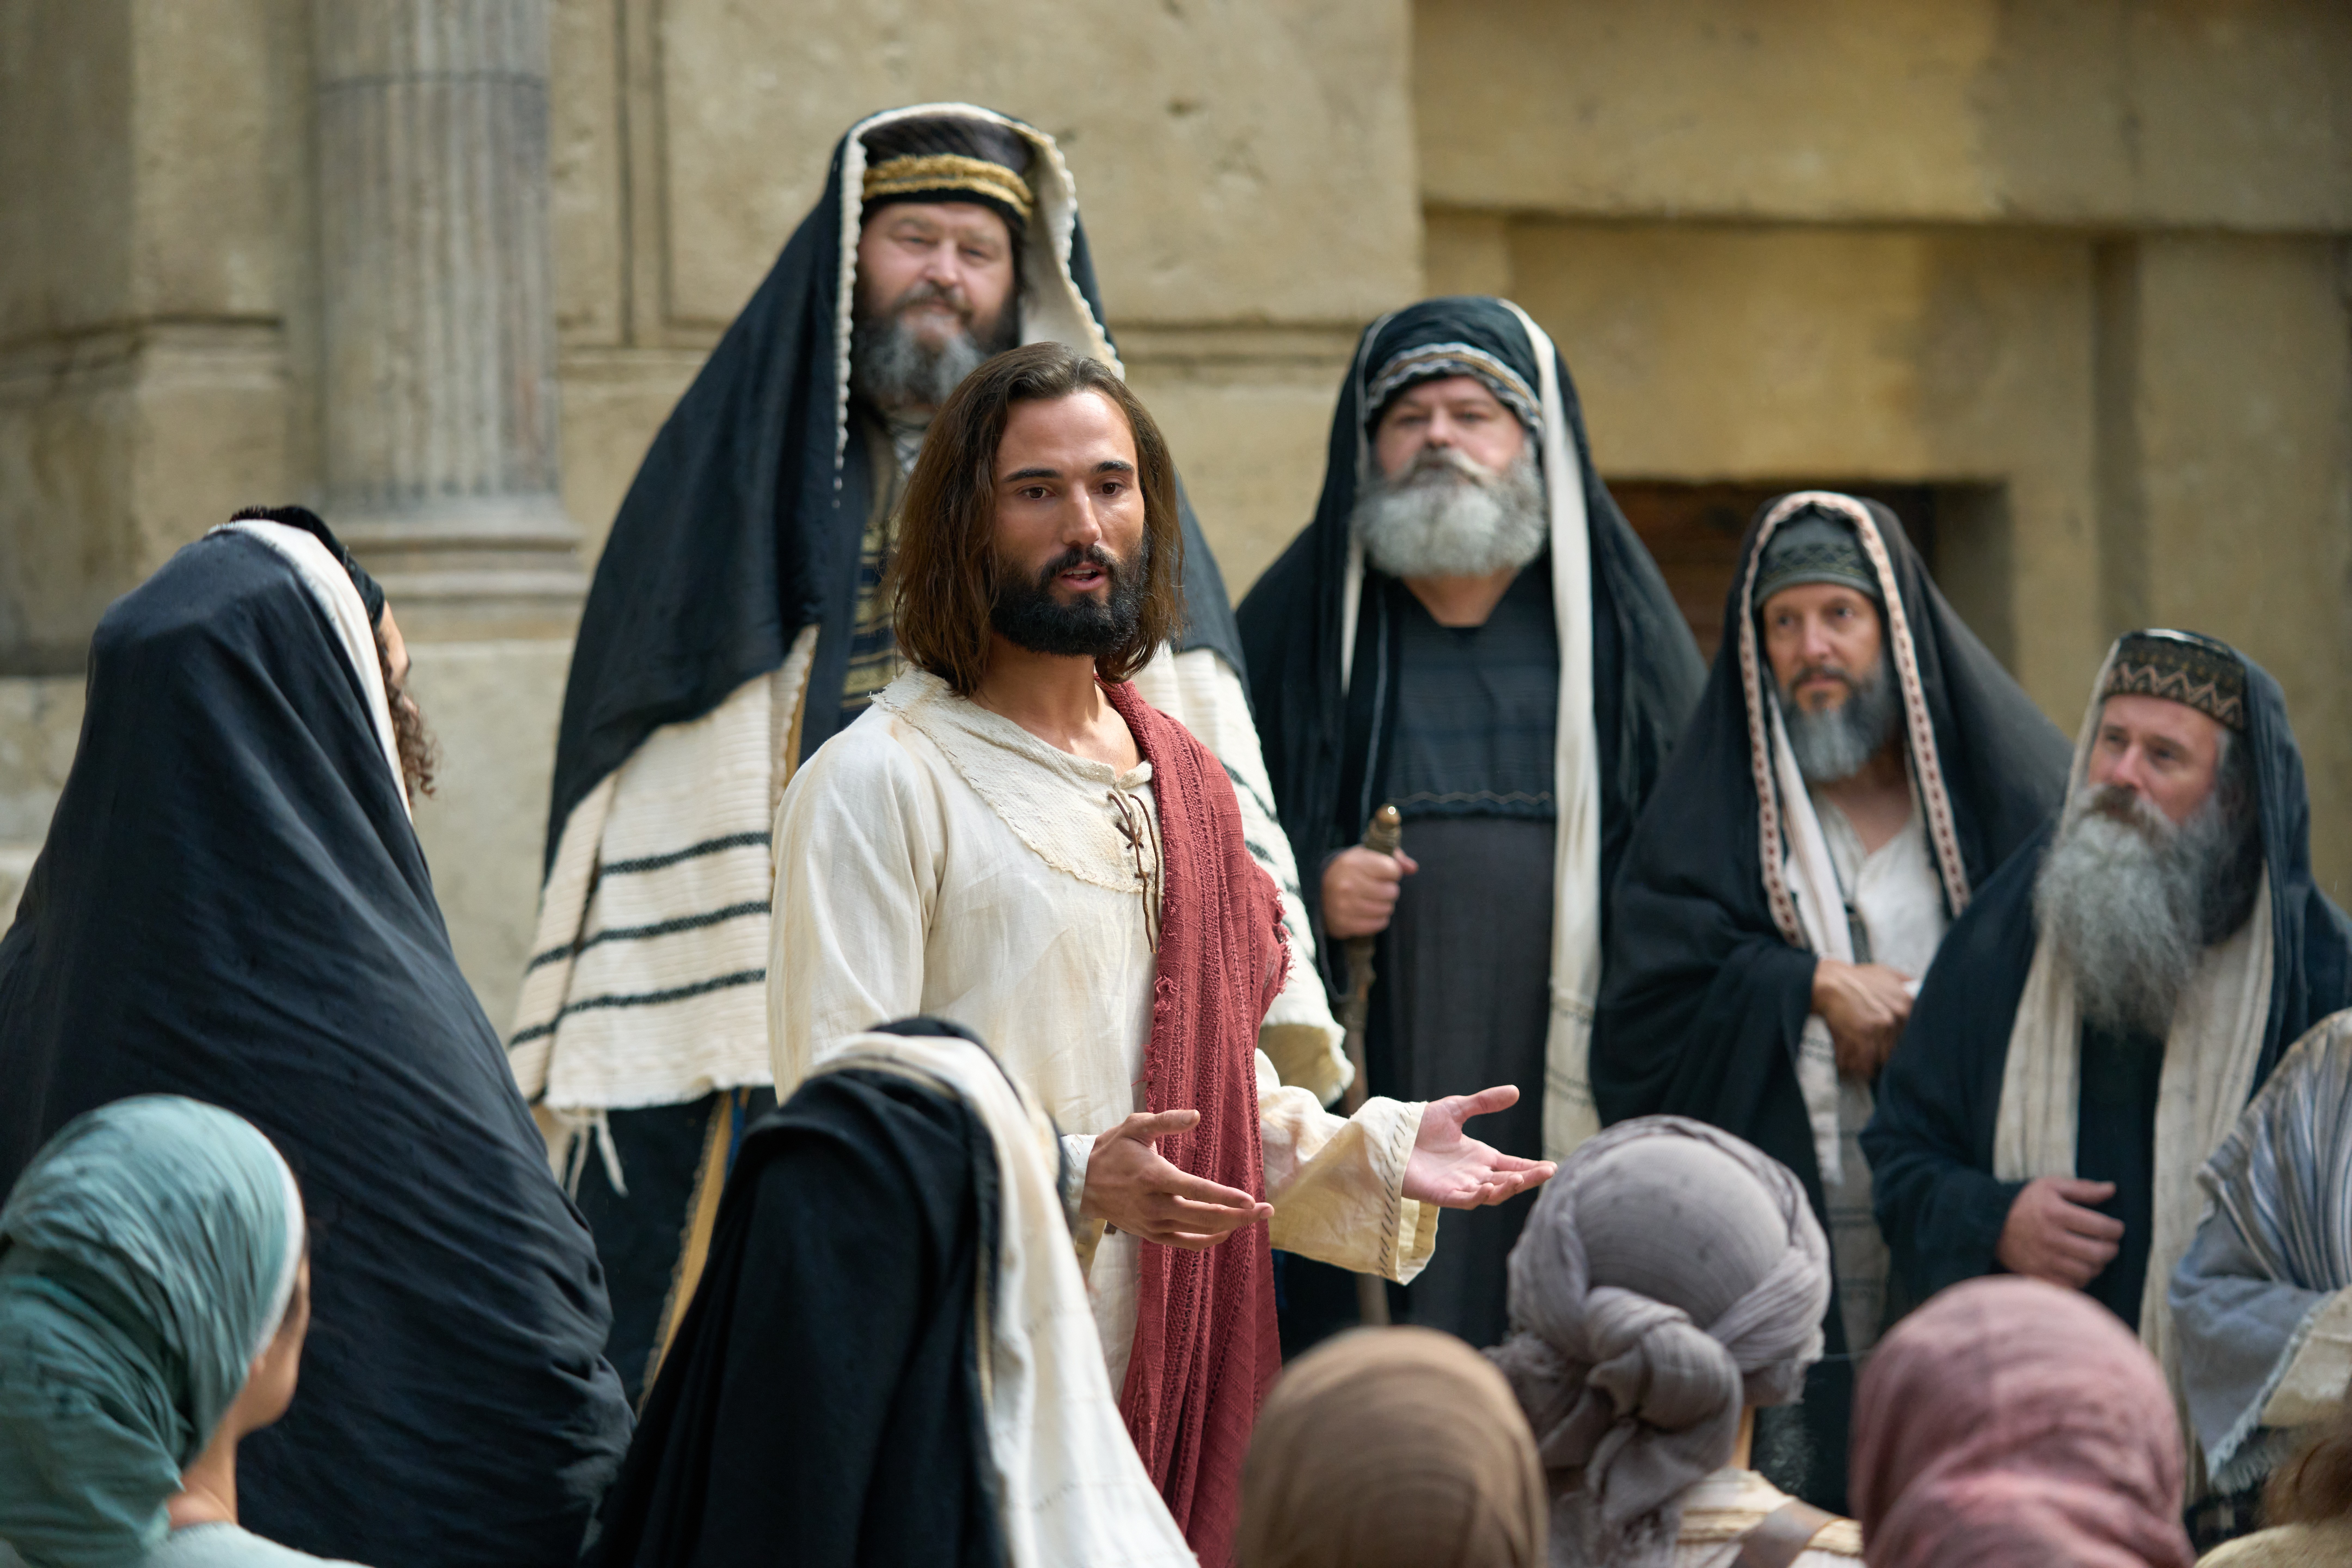 Jesus Christ speaks to a crowd of people in Jerusalem during his mortal ministry. He teaches them that he has other sheep that he must go and minister to.